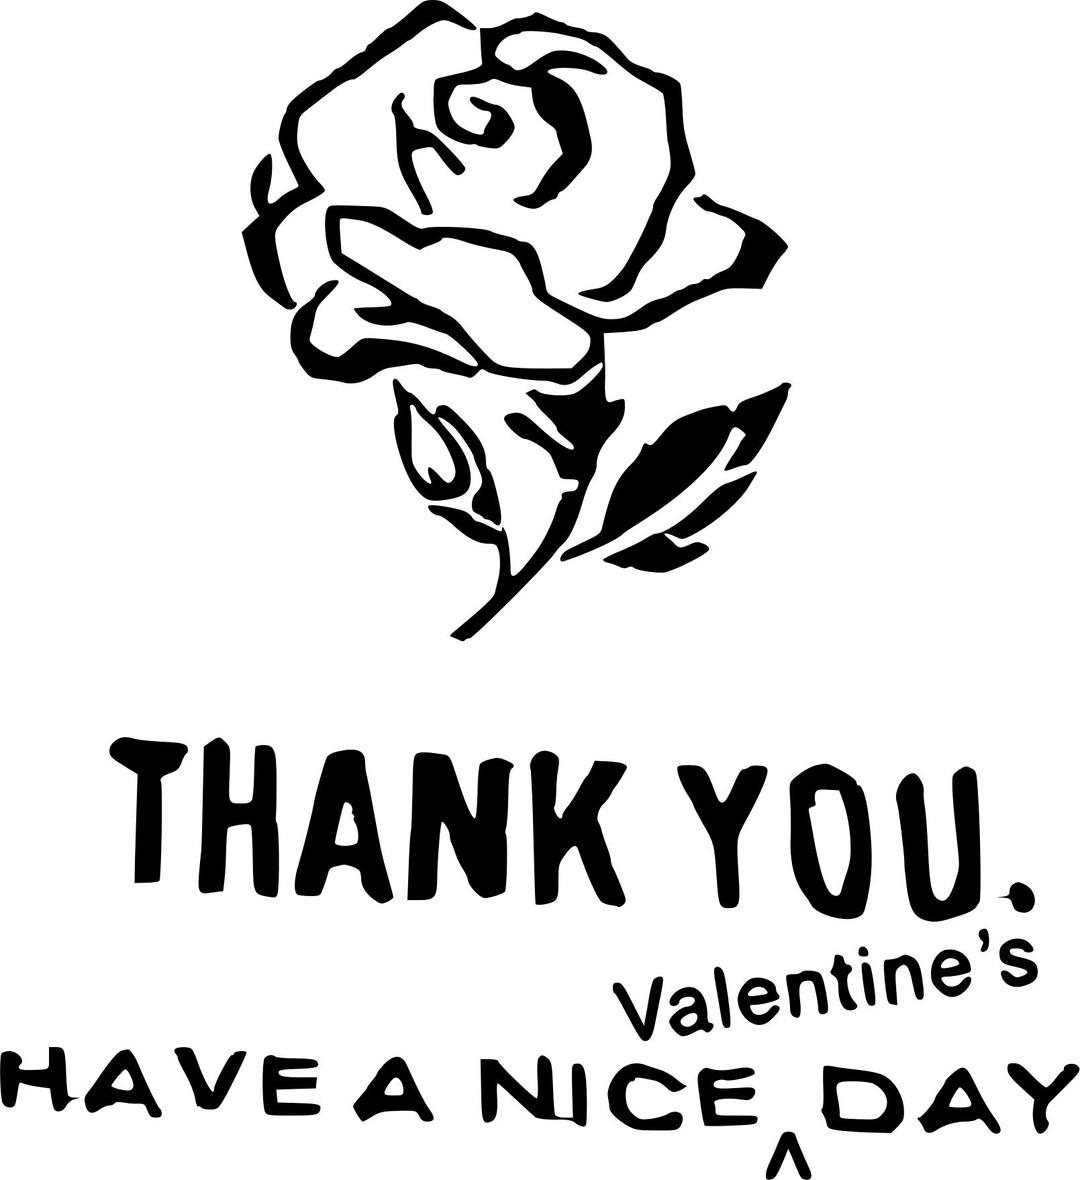 Have a nice valentines day png transparent